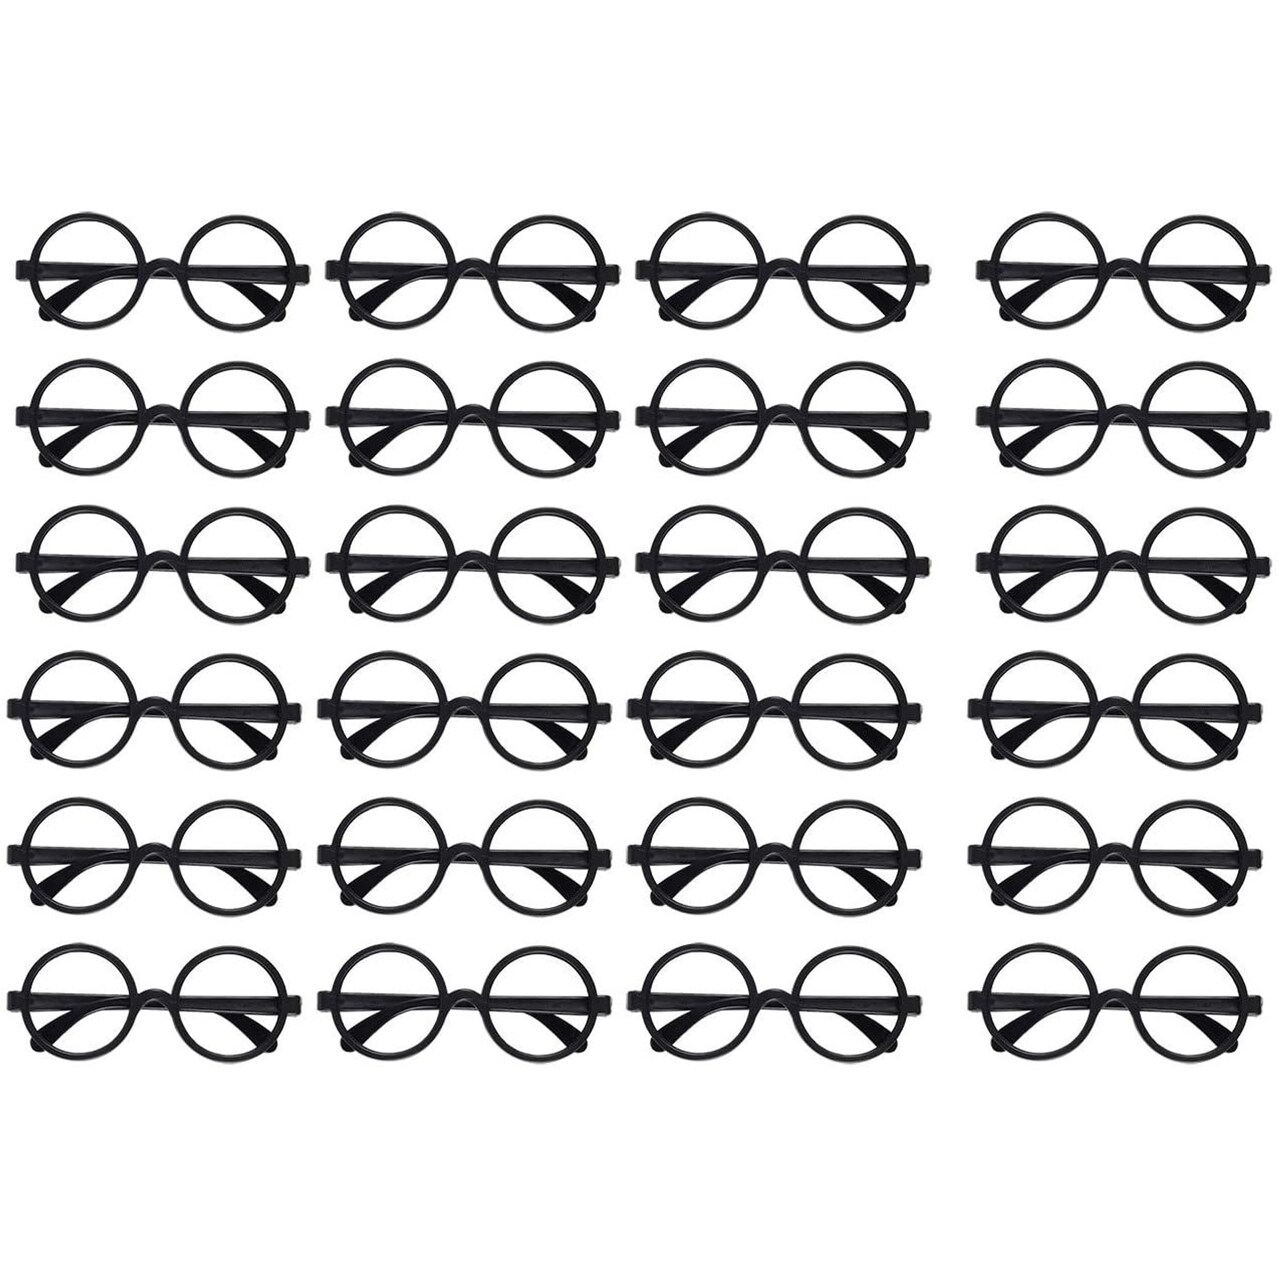 24 Pack Nerd Glasses Party Supplies, Round Black Wizard Glasses for Cosplay, Costumes